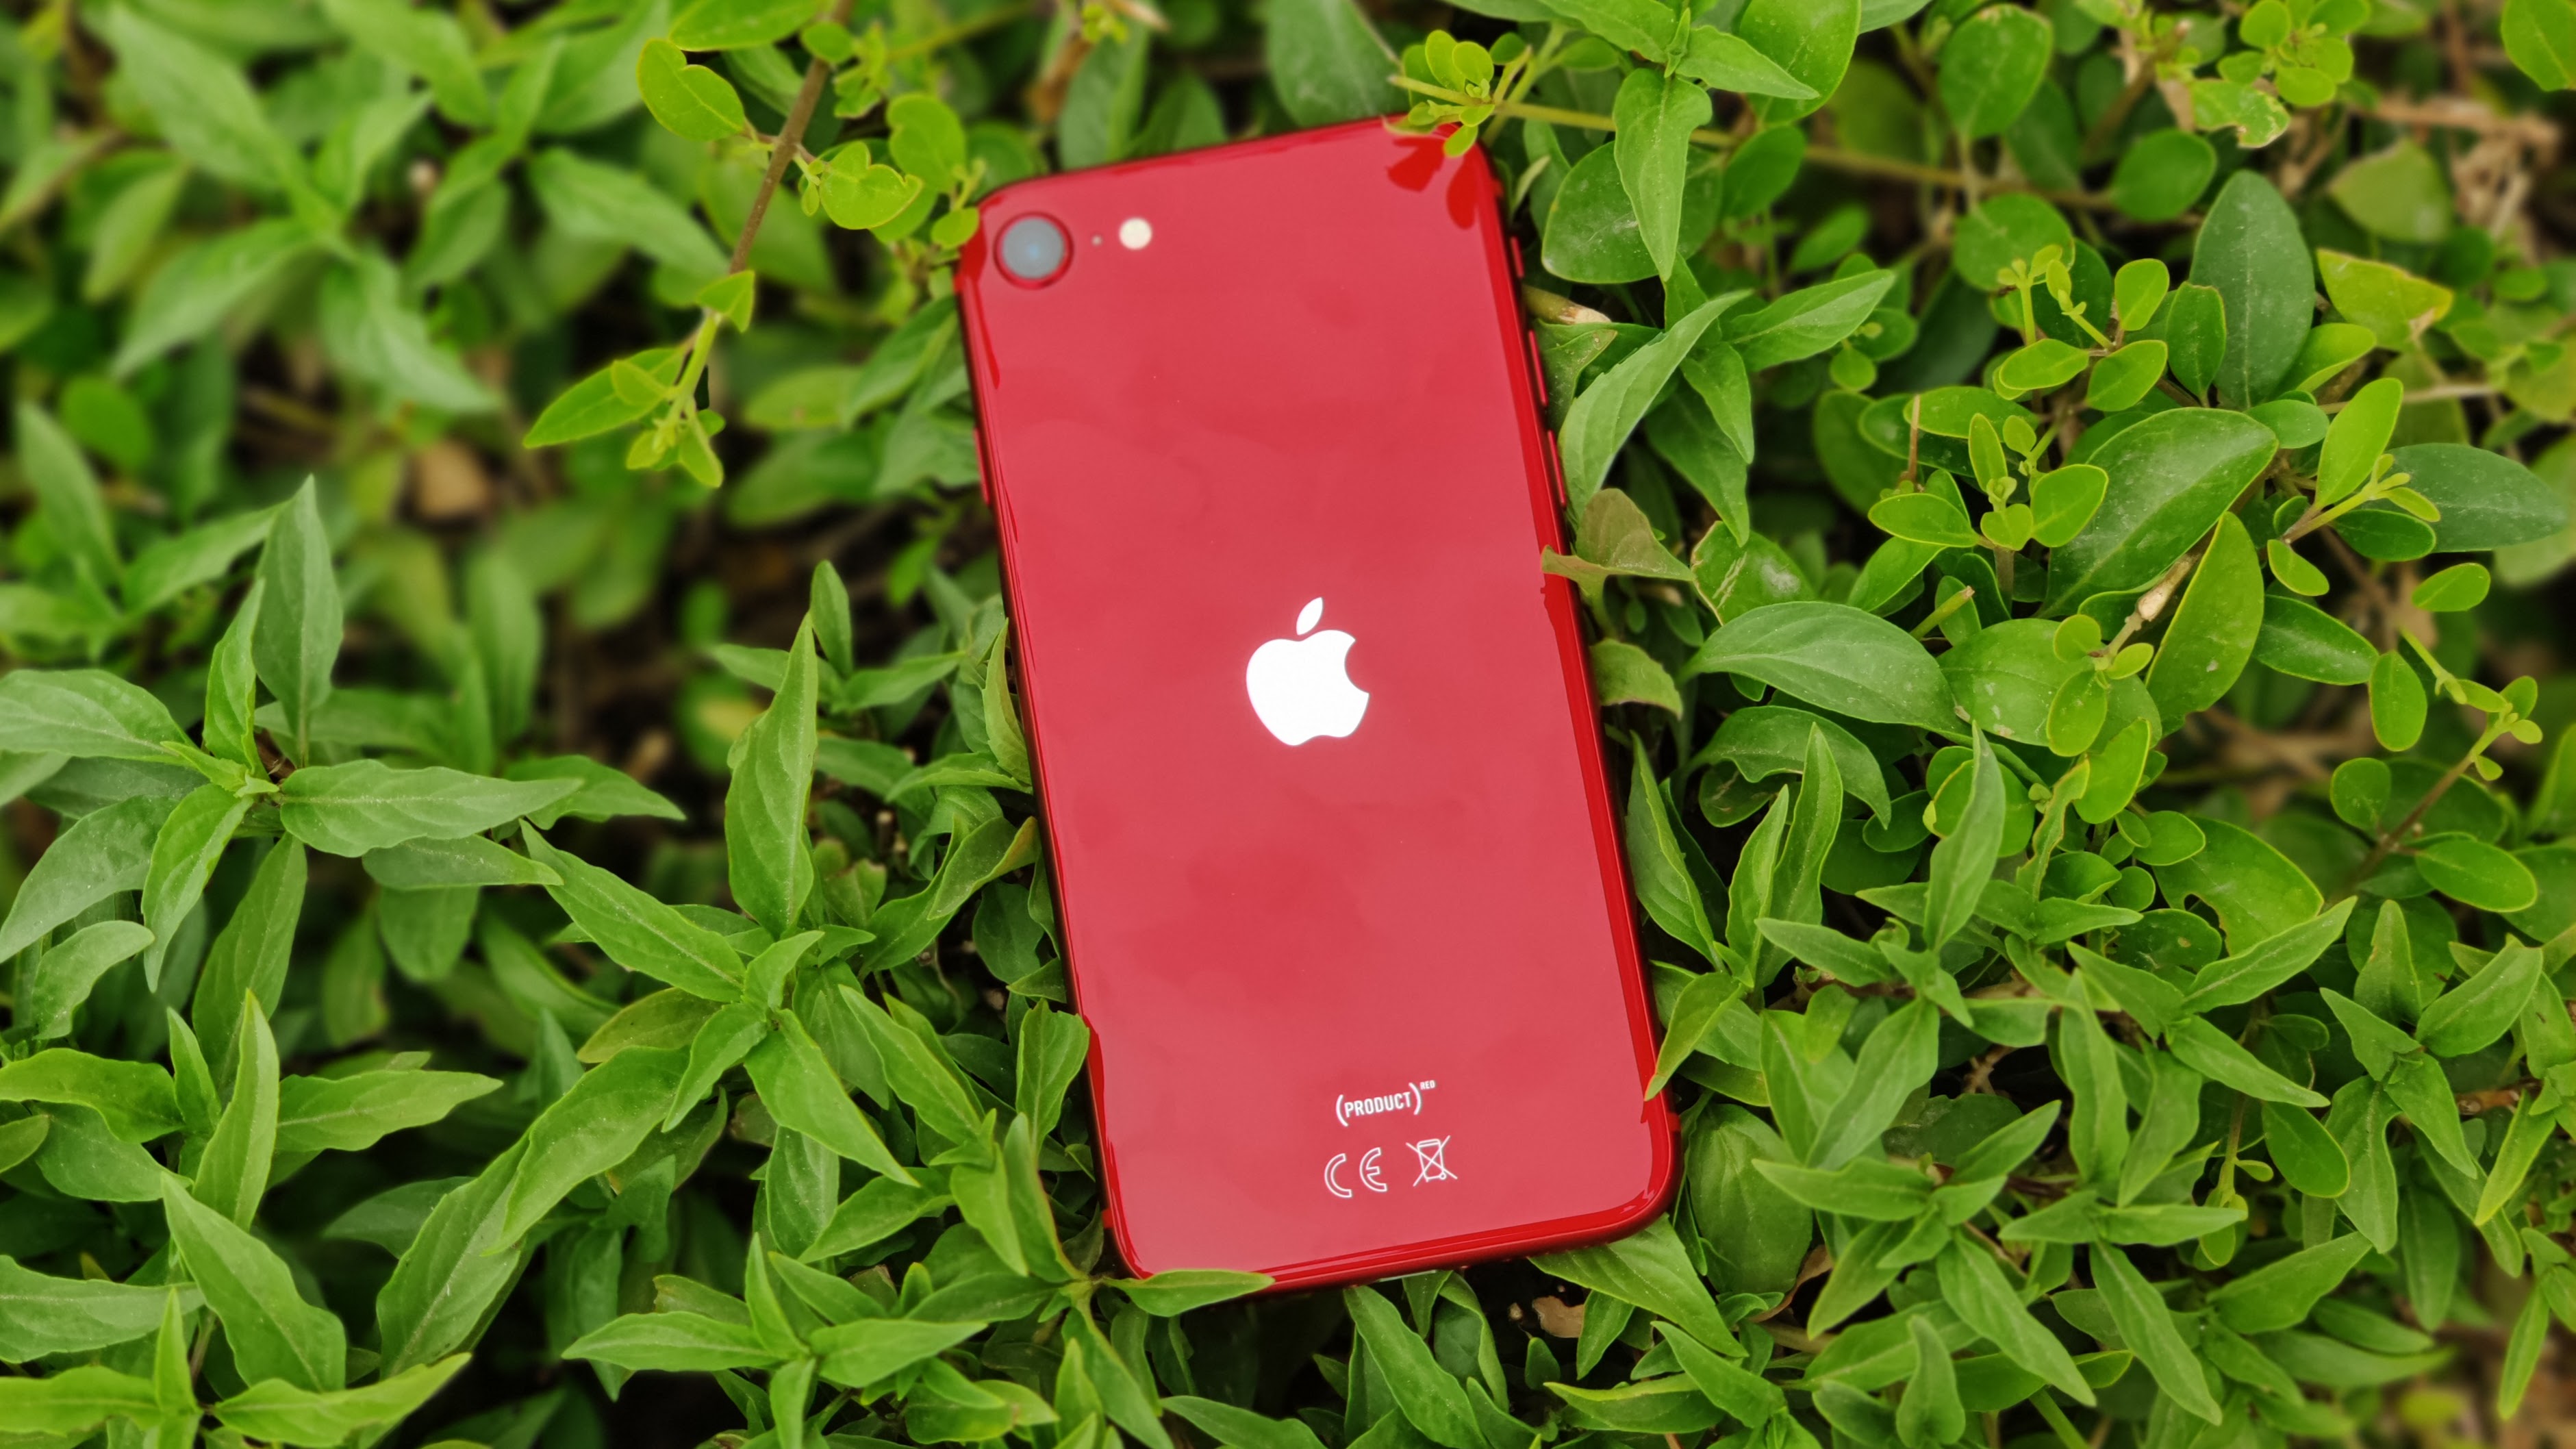 The iPhone SE (2020) in red on a green background